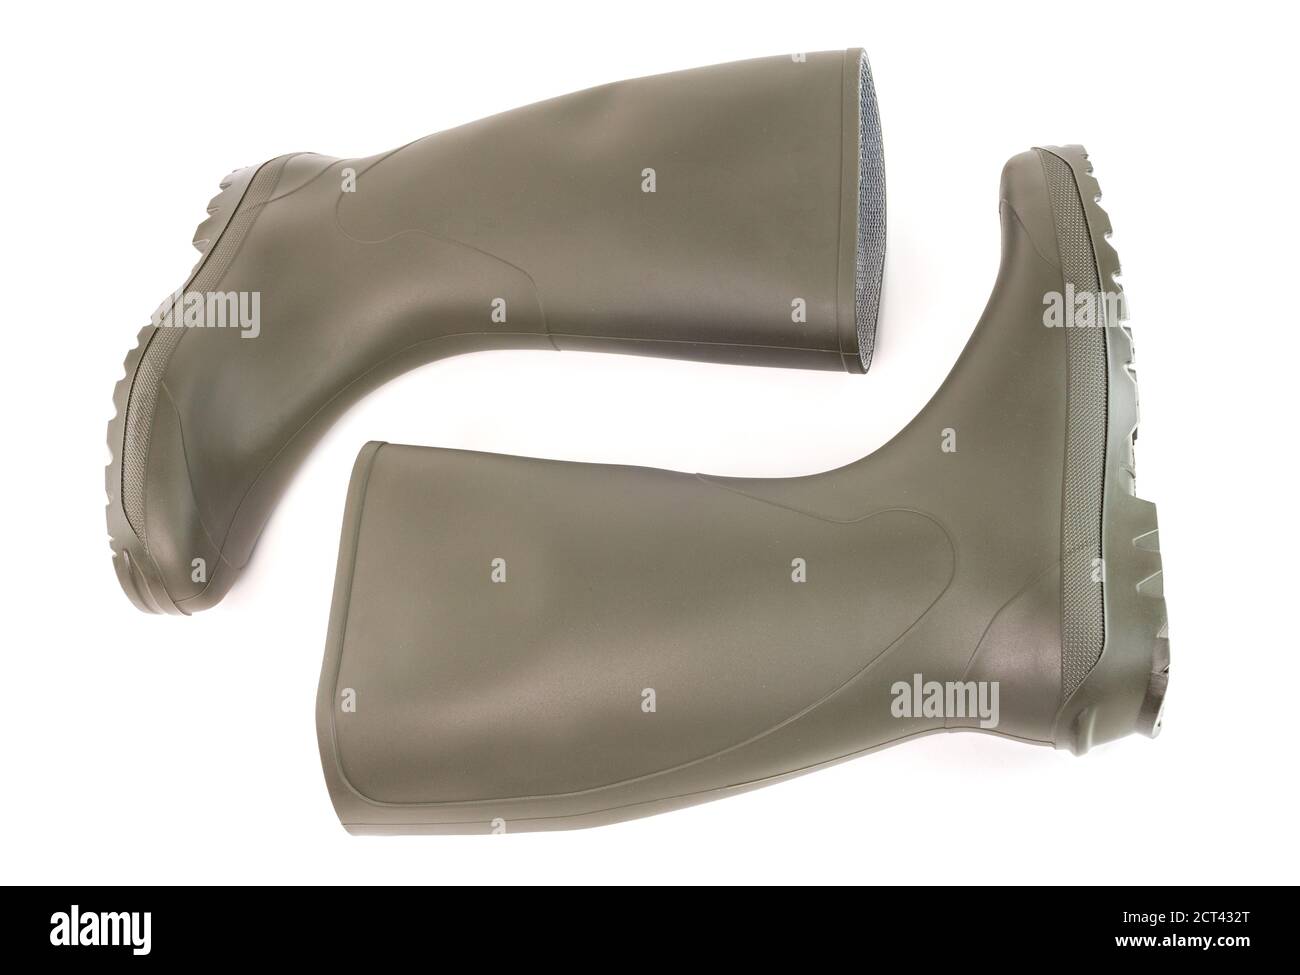 Pair of clean green rubber boots laying down isolated on white background. Front view. Stock Photo